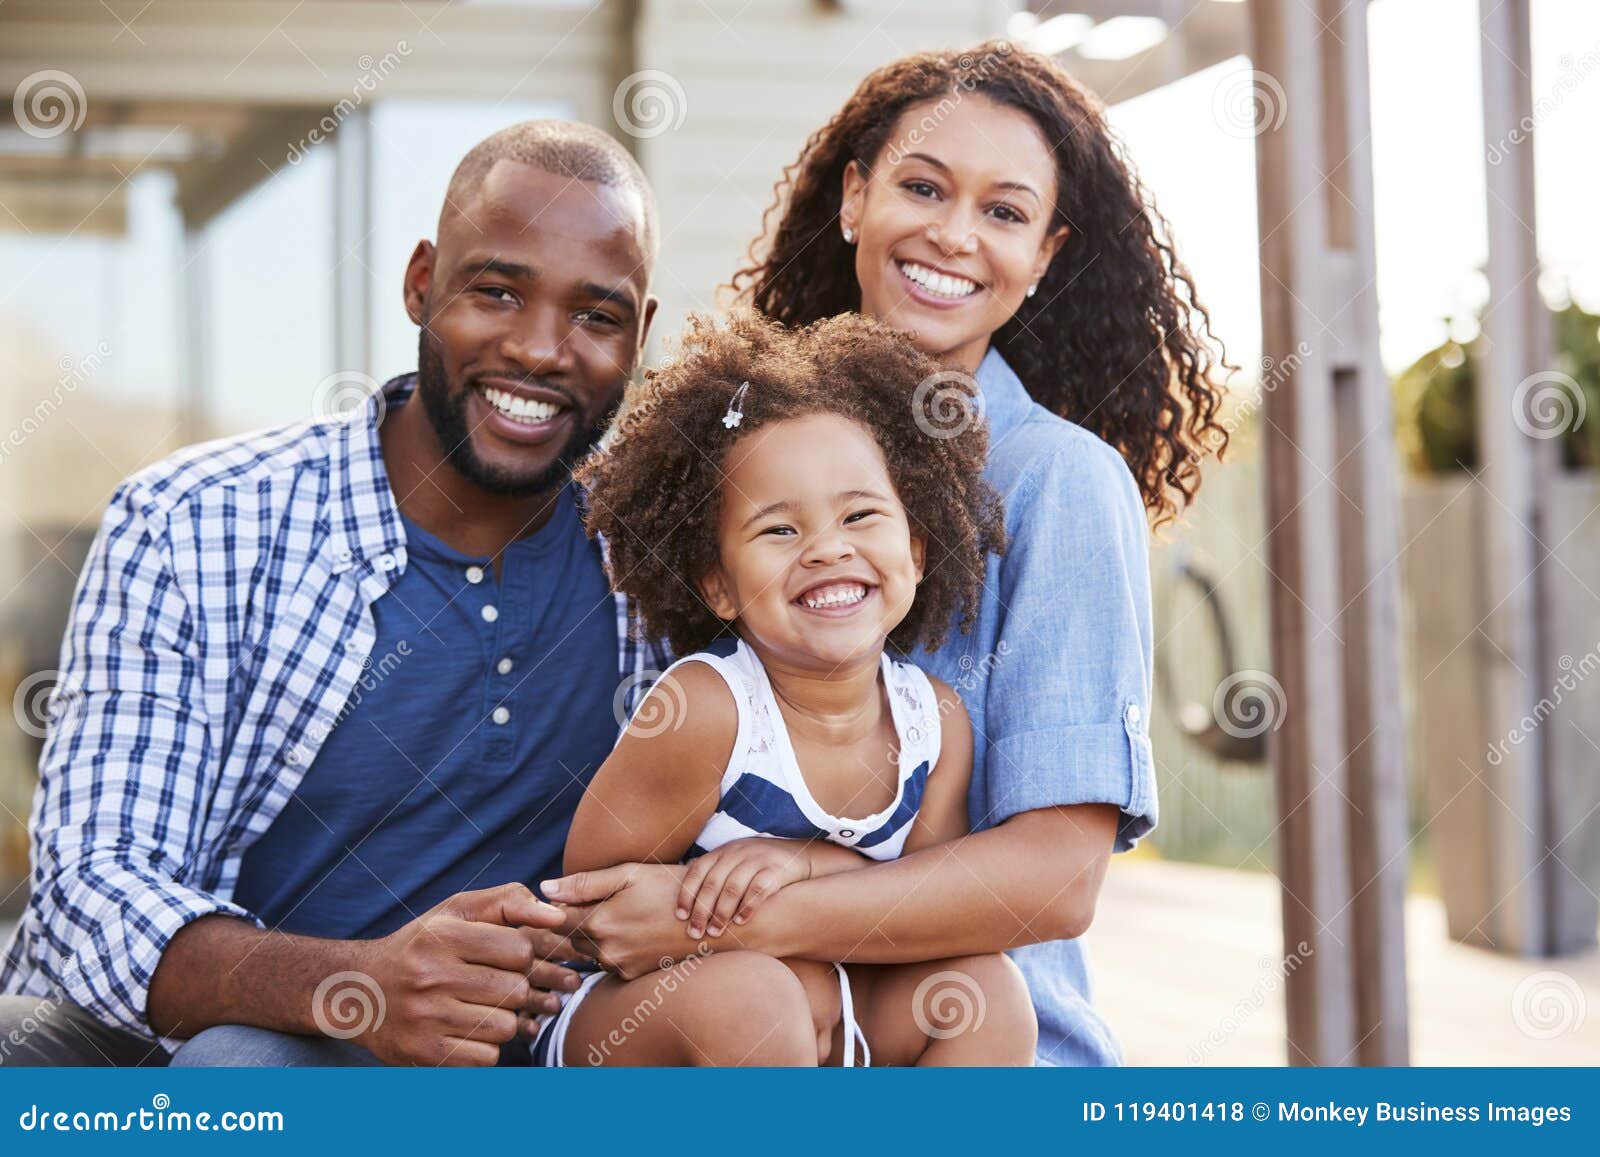 young black family embracing outdoors and smiling at camera